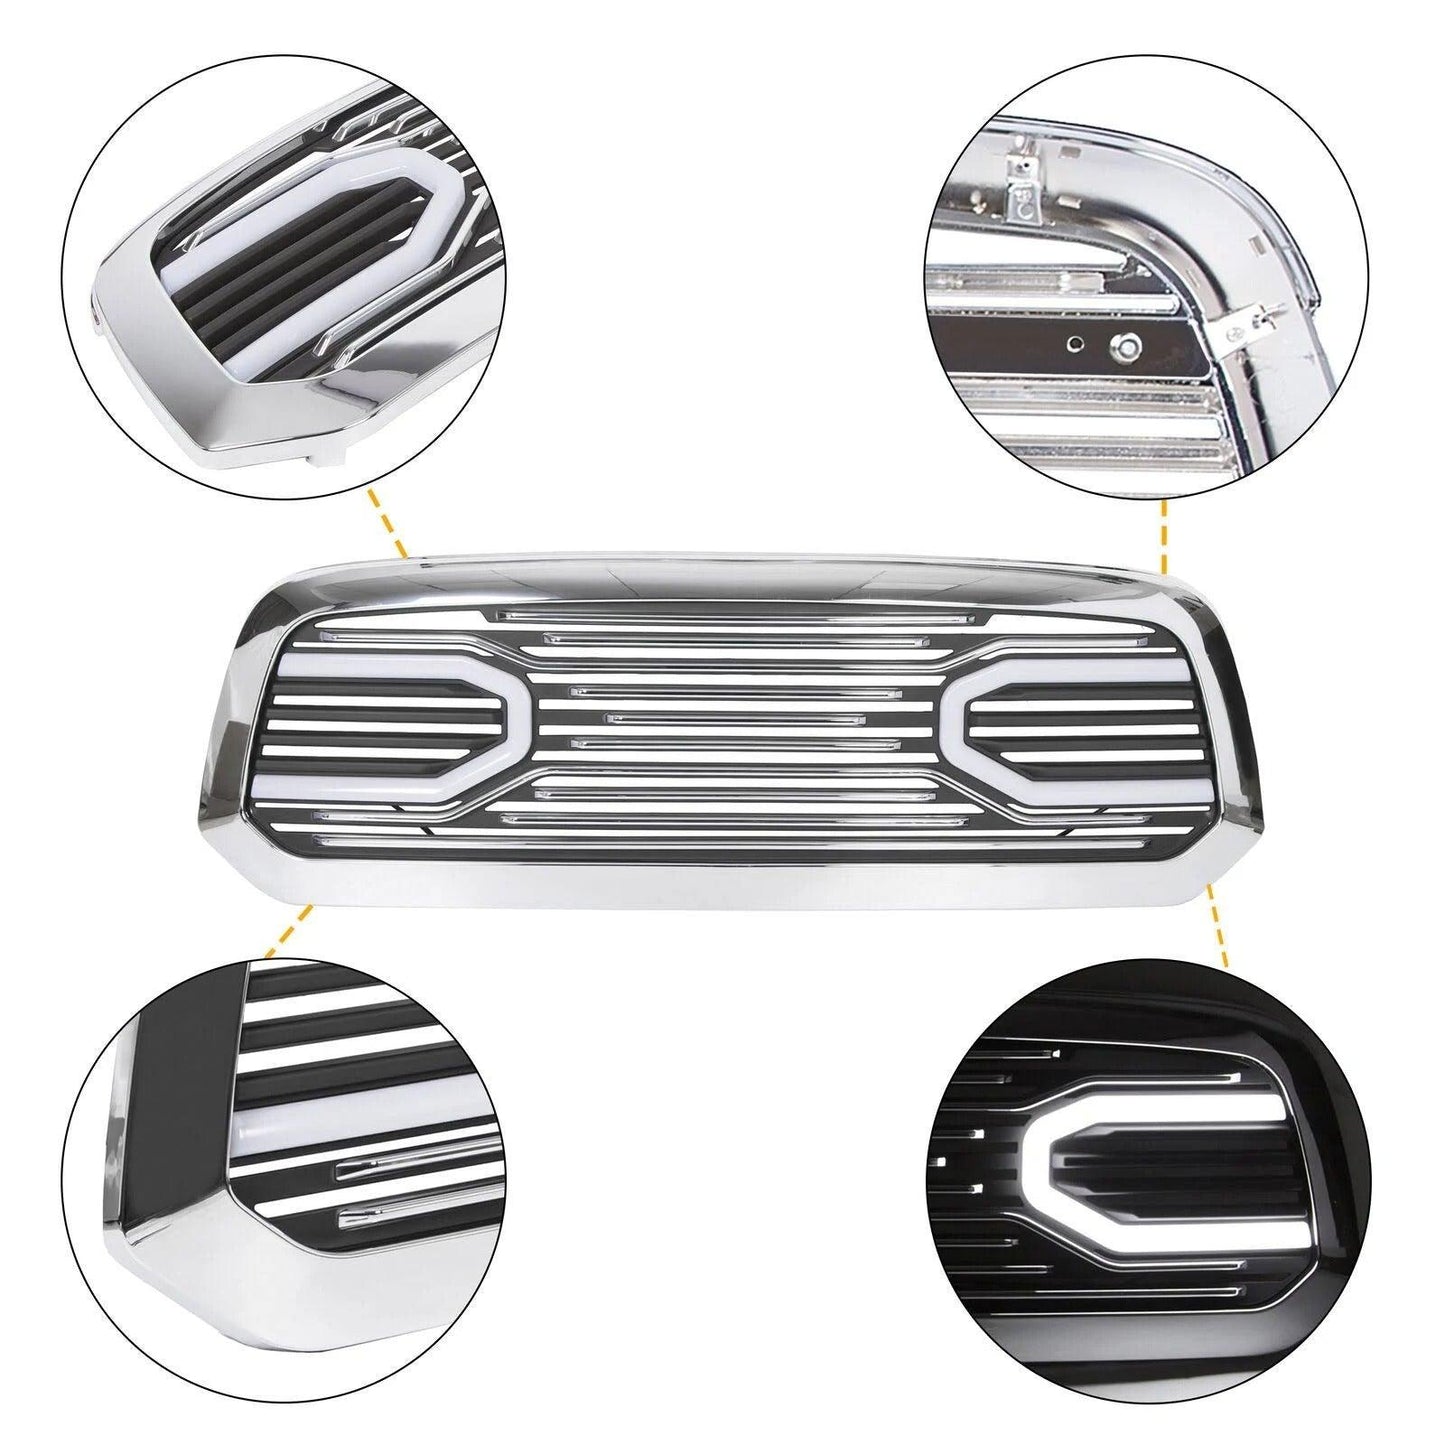 Grille For 2013 2014 2015 2016 2017 2018 RAM 1500 Chrome Grill W/ Letters W/Lights - trucfri